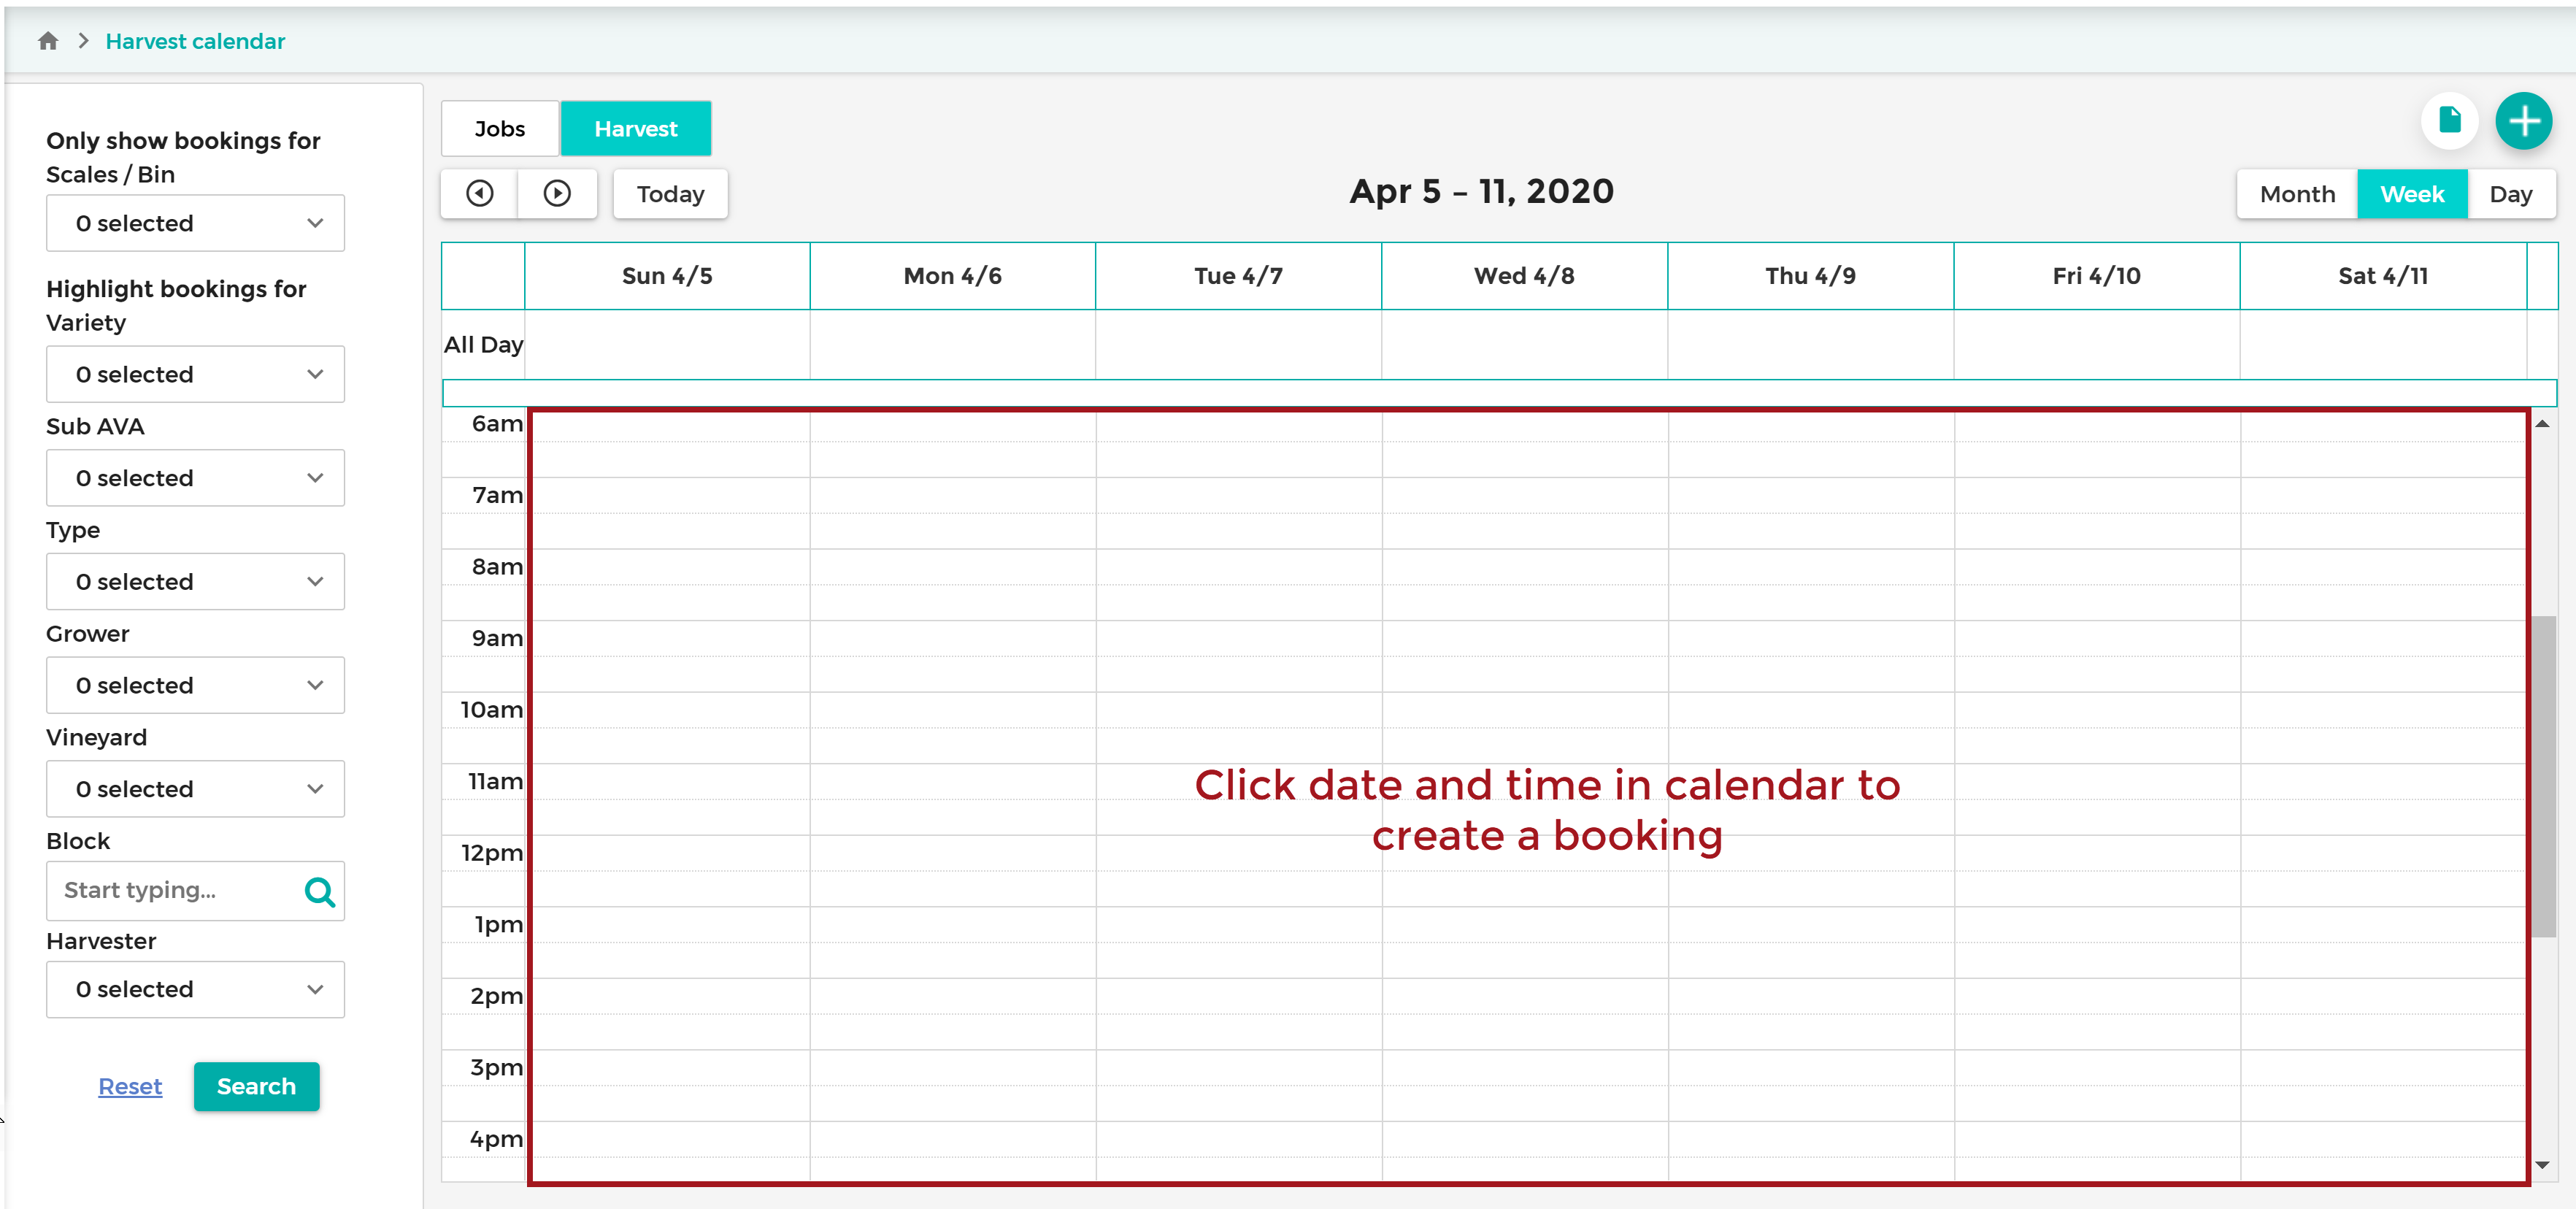 Harvest_-_Creating_Booking_in_Calendar_20200403.png